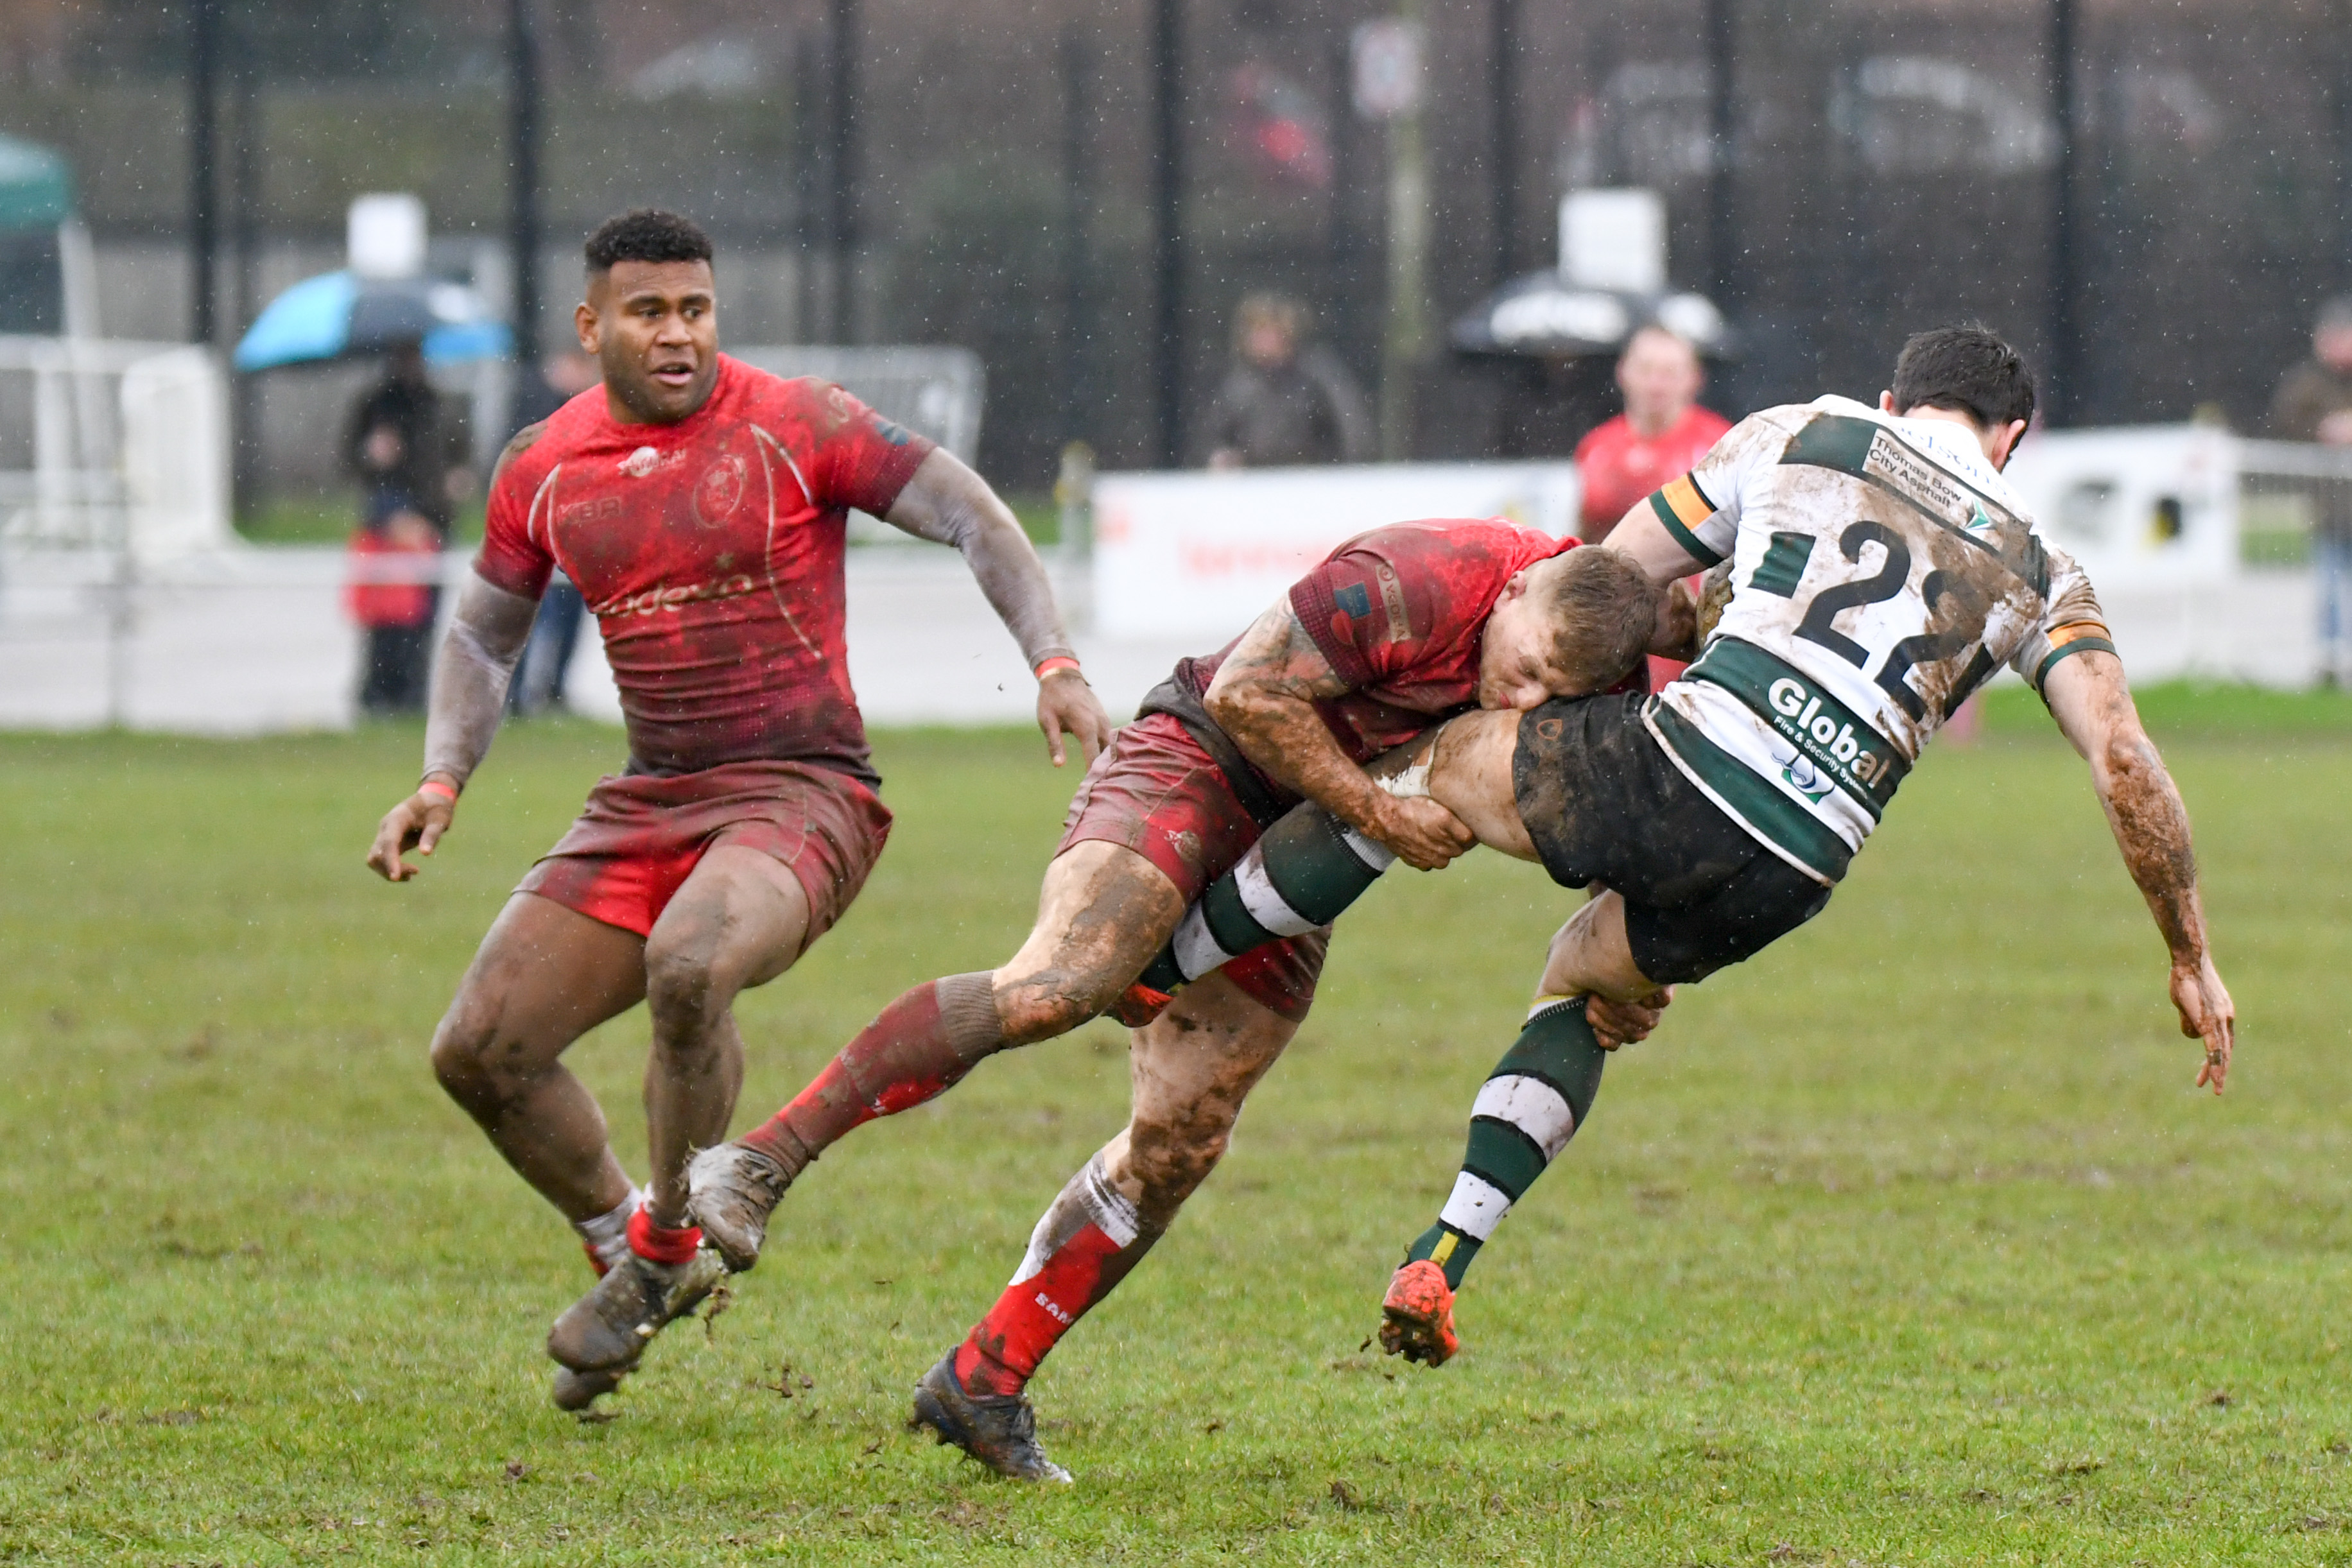 Army v Oxford University and Nottingham Rugby